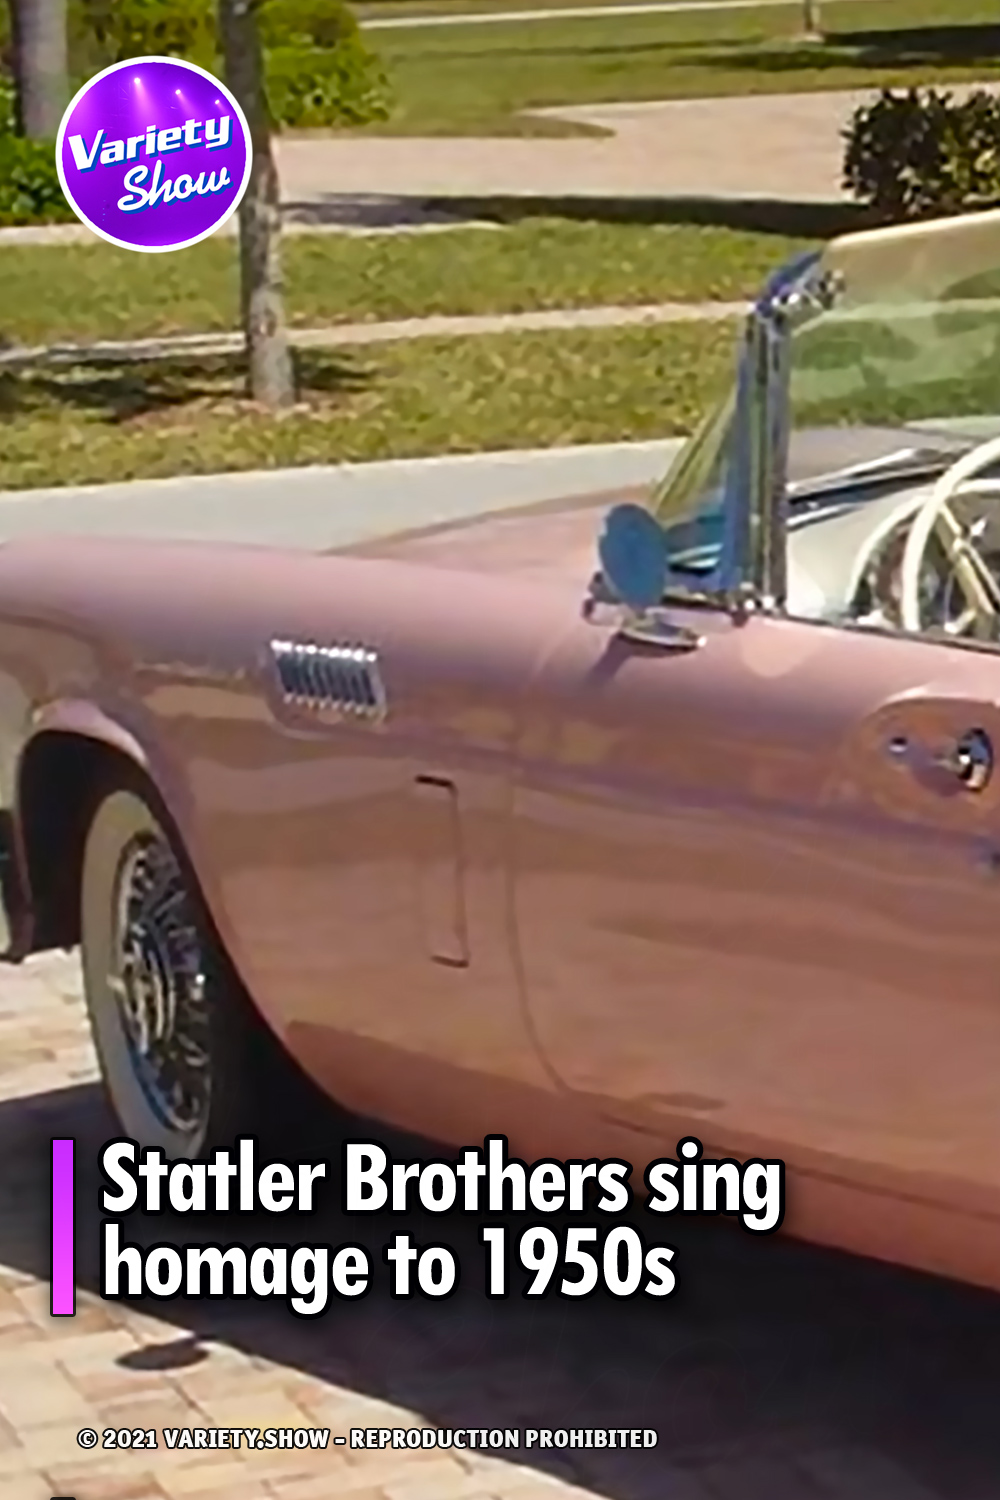 Statler Brothers sing homage to 1950s